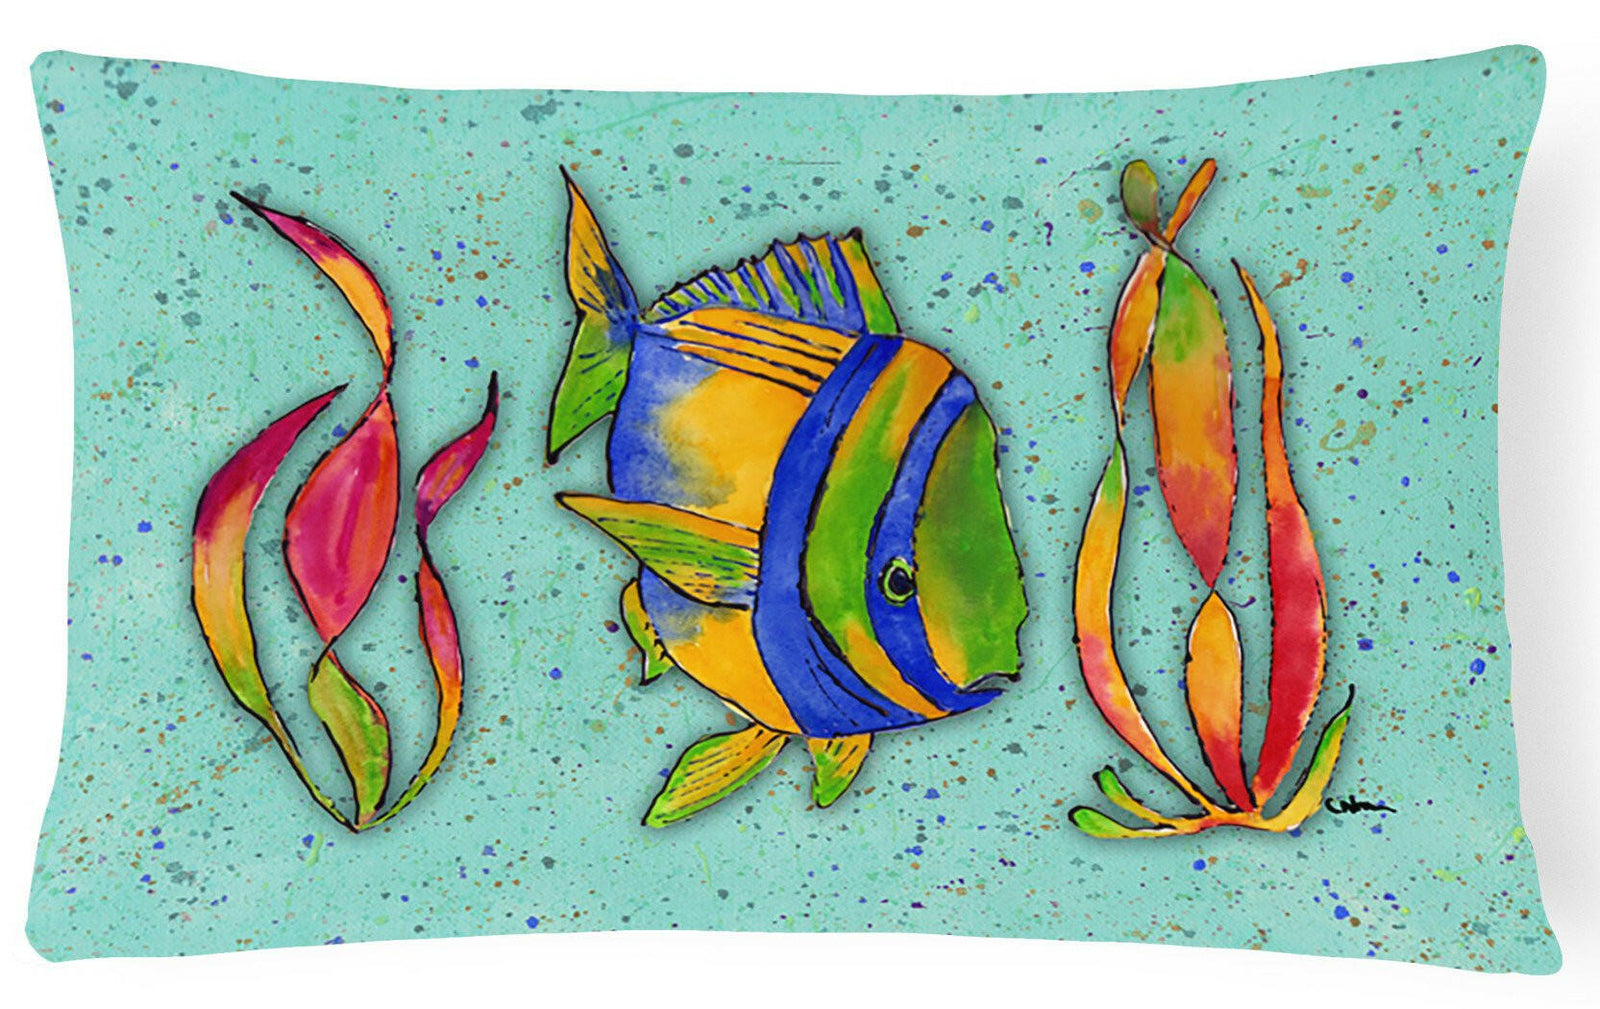 Tropical Fish on Teal   Canvas Fabric Decorative Pillow by Caroline's Treasures